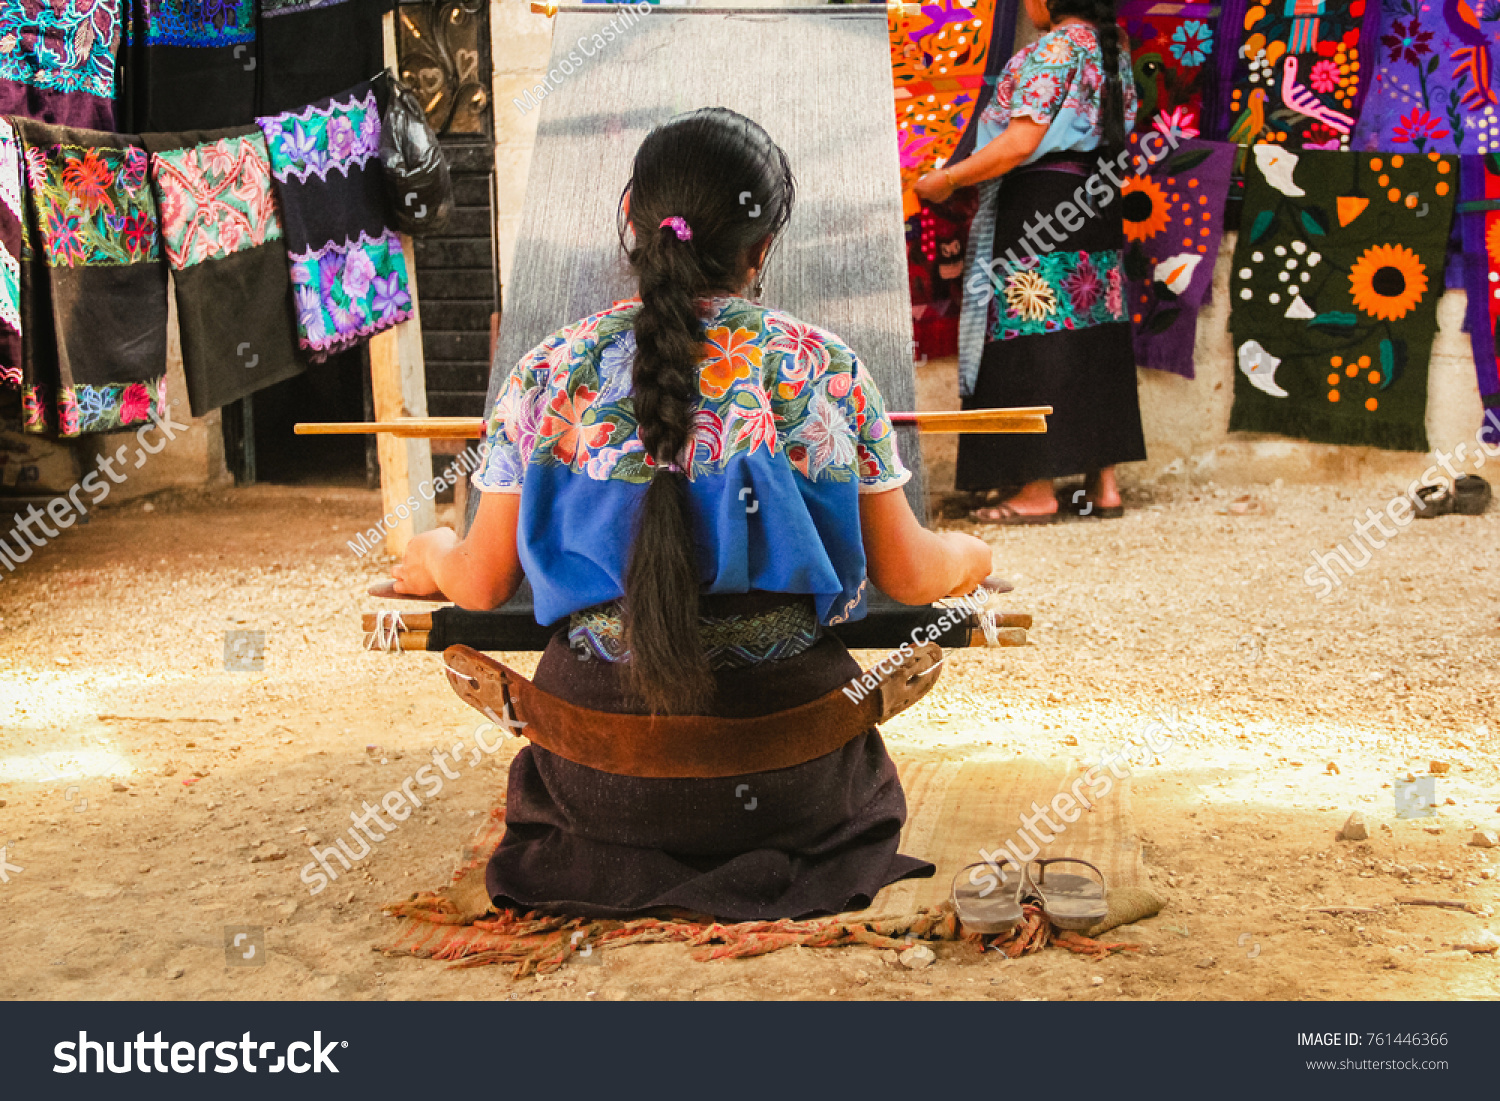 Mexican woman working loom in Chiapas Mexico #761446366